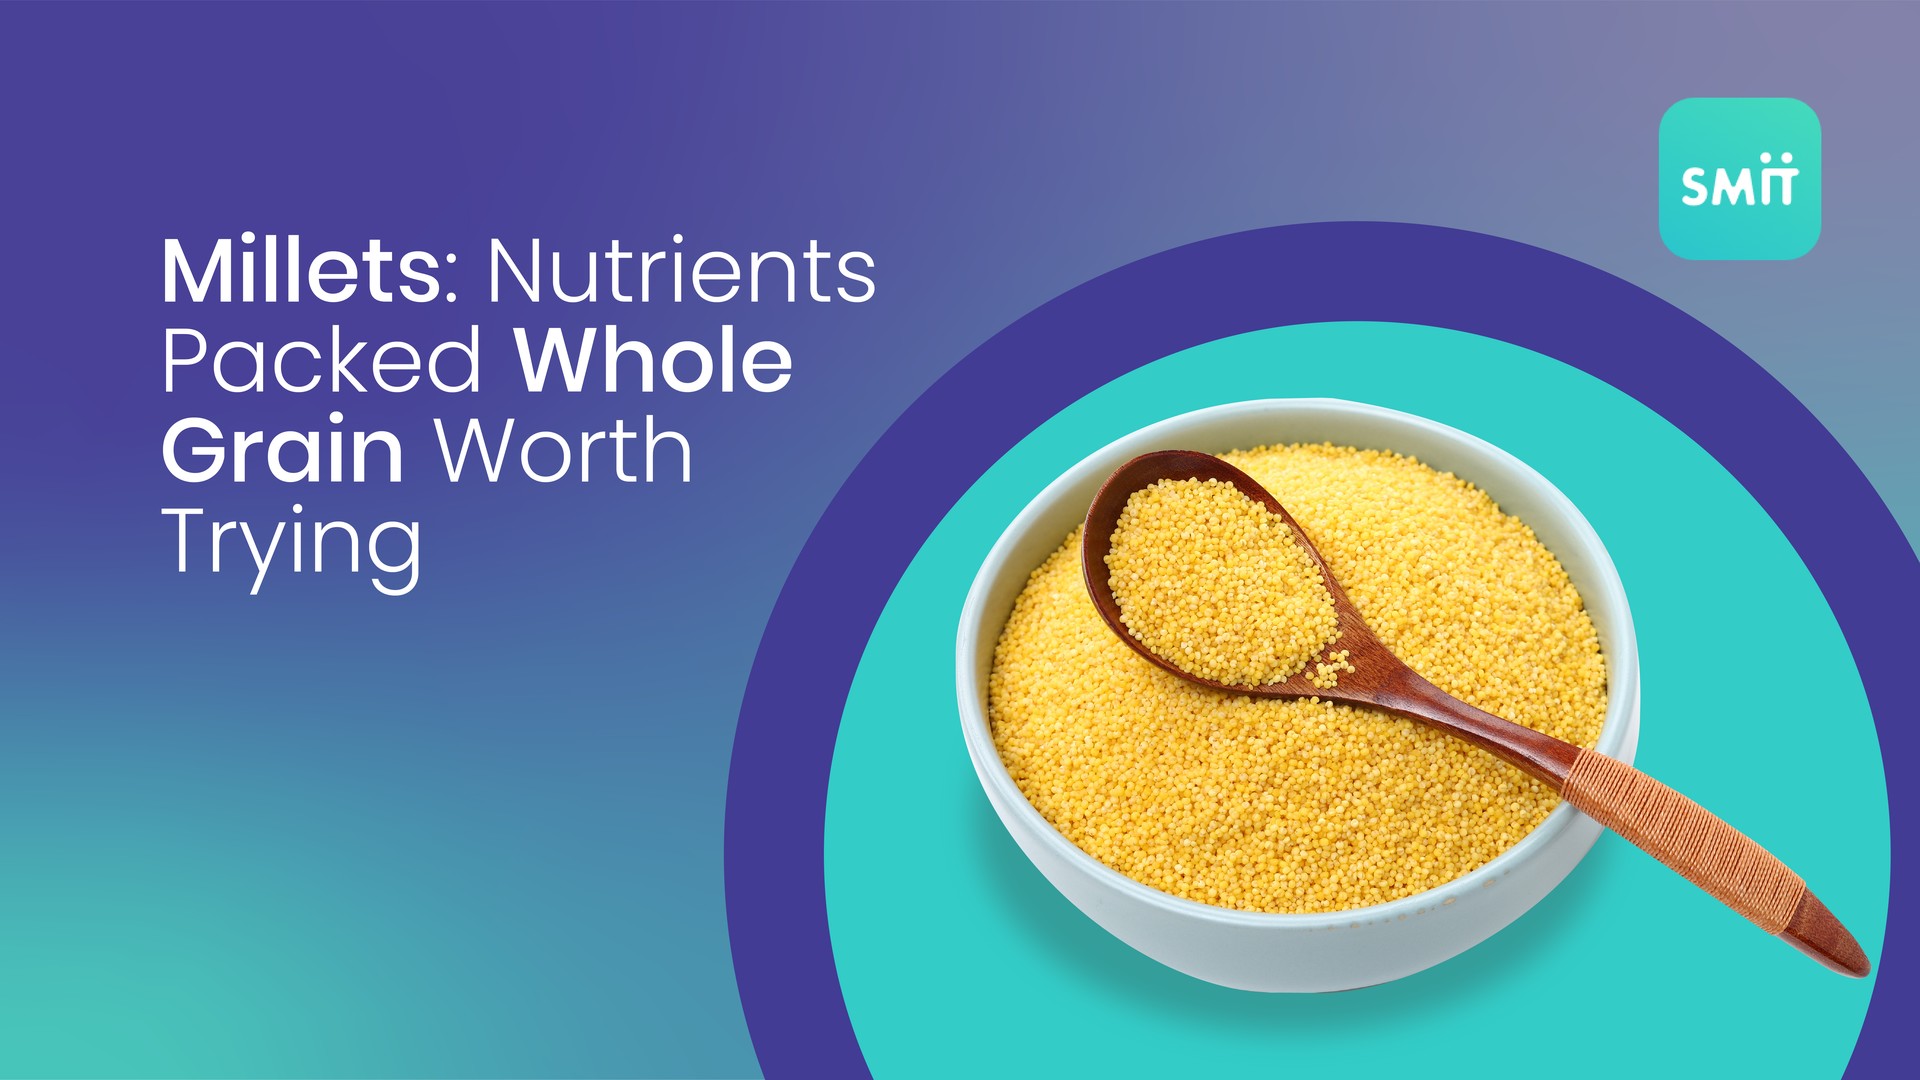 Millets: Nutrients Packed Whole Grain Worth Trying